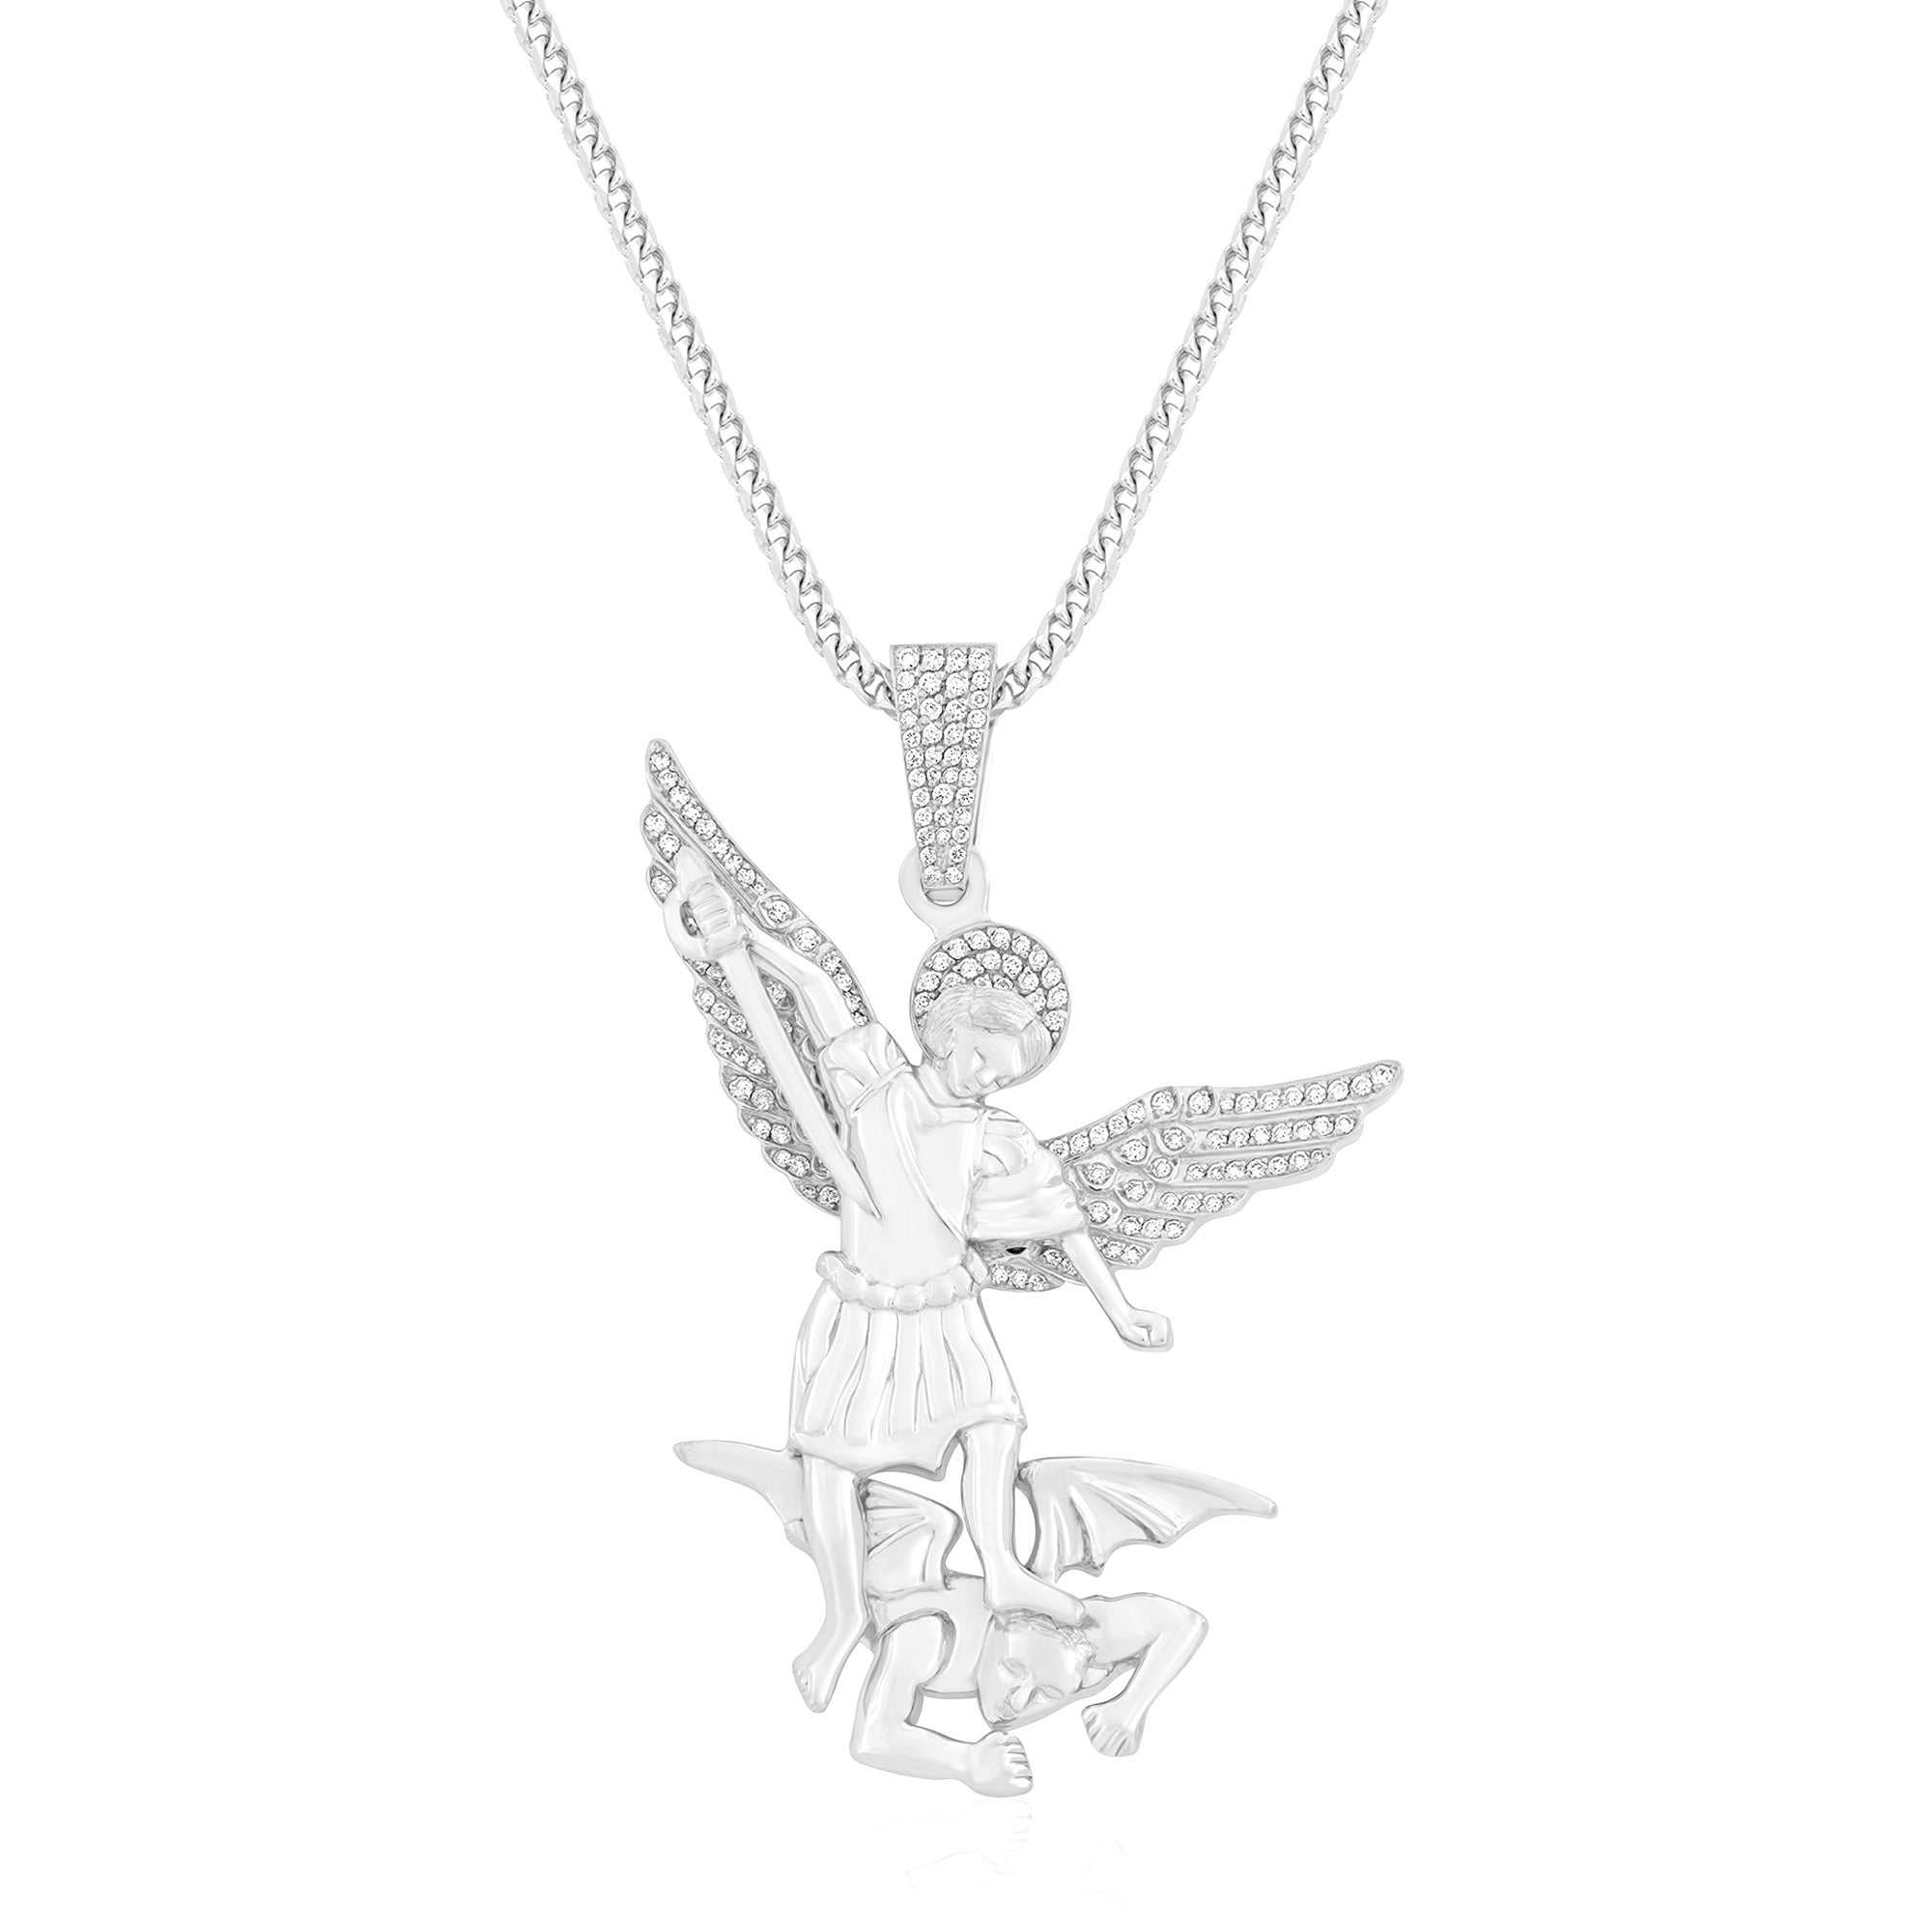 Baby Saint Michael Arch Angel Piece (Partially Iced) (14K WHITE GOLD) - IF & Co. Custom Jewelers